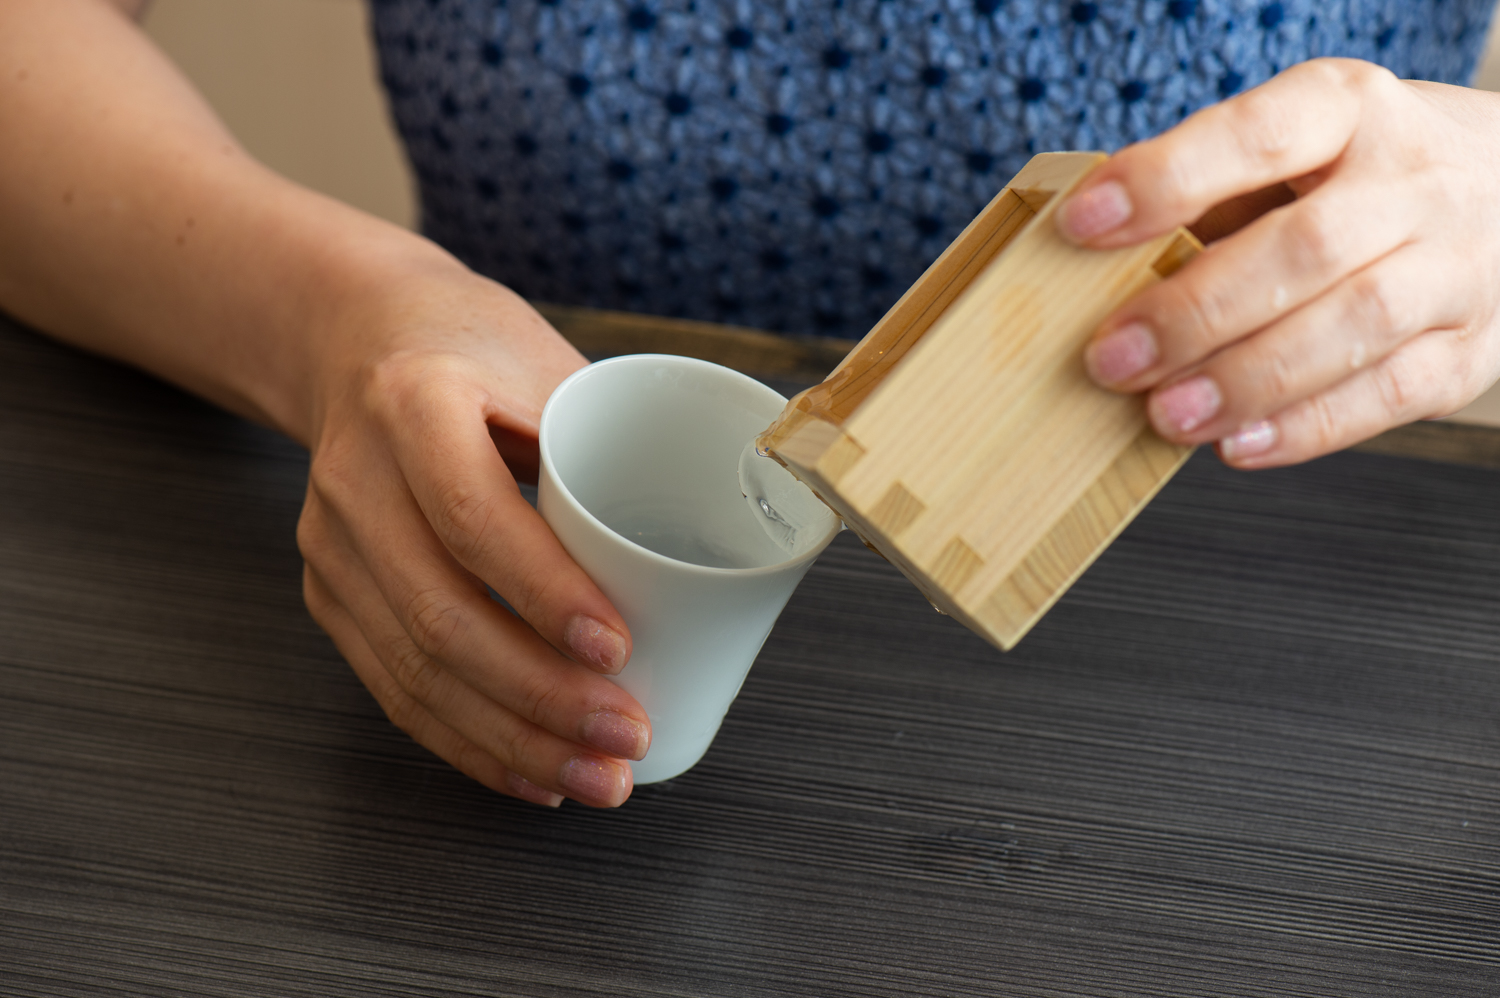 Pour the excess sake from the masu into your glass